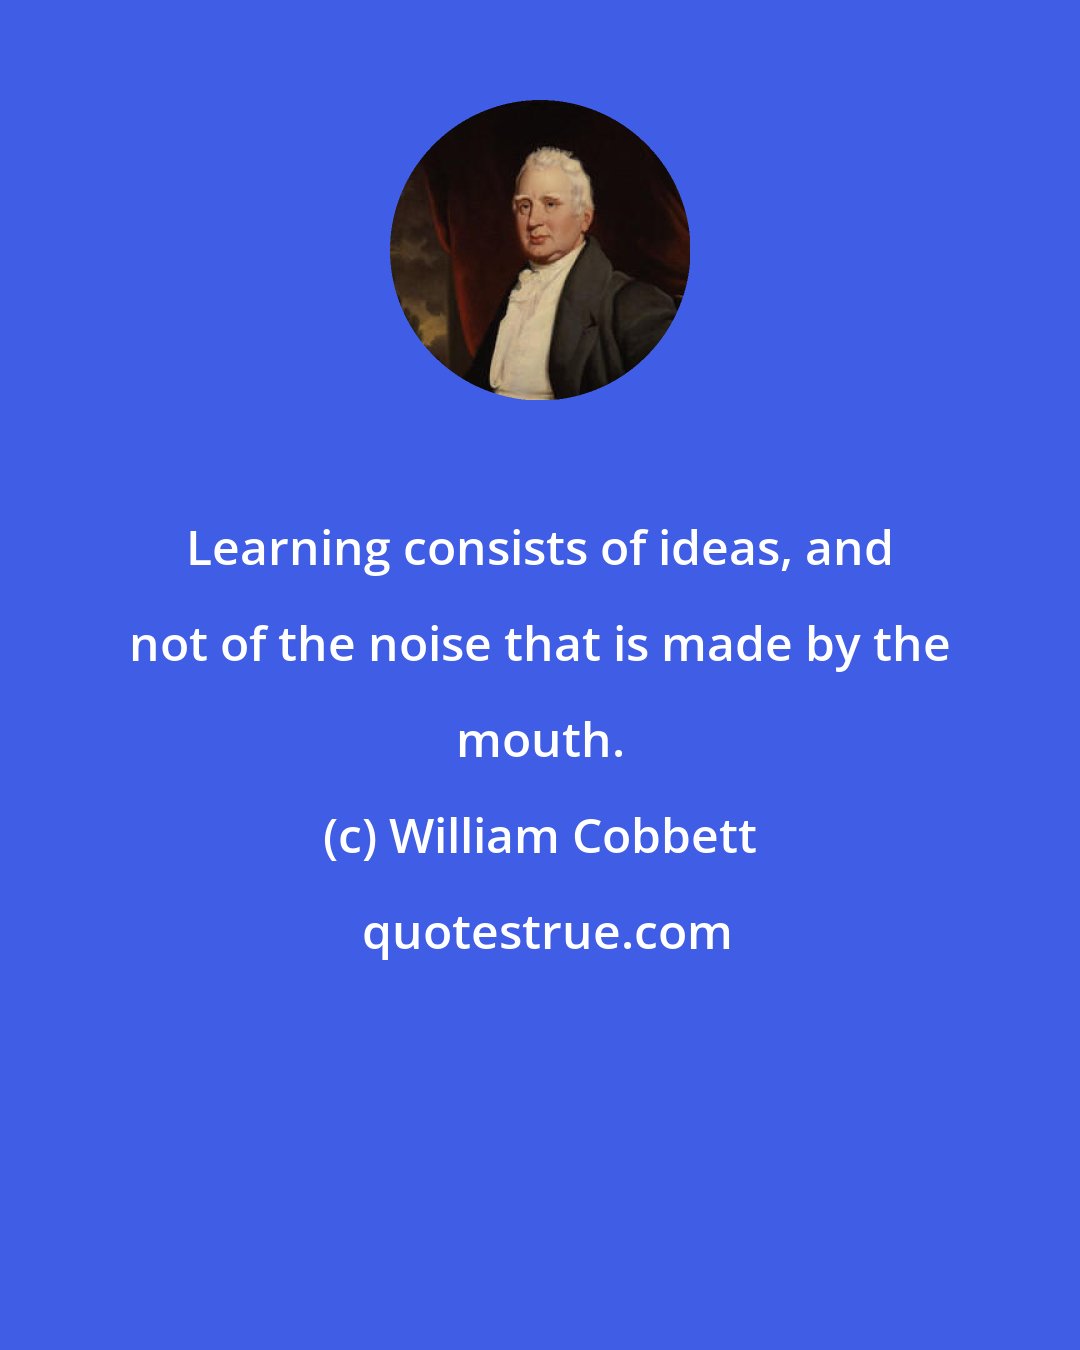 William Cobbett: Learning consists of ideas, and not of the noise that is made by the mouth.